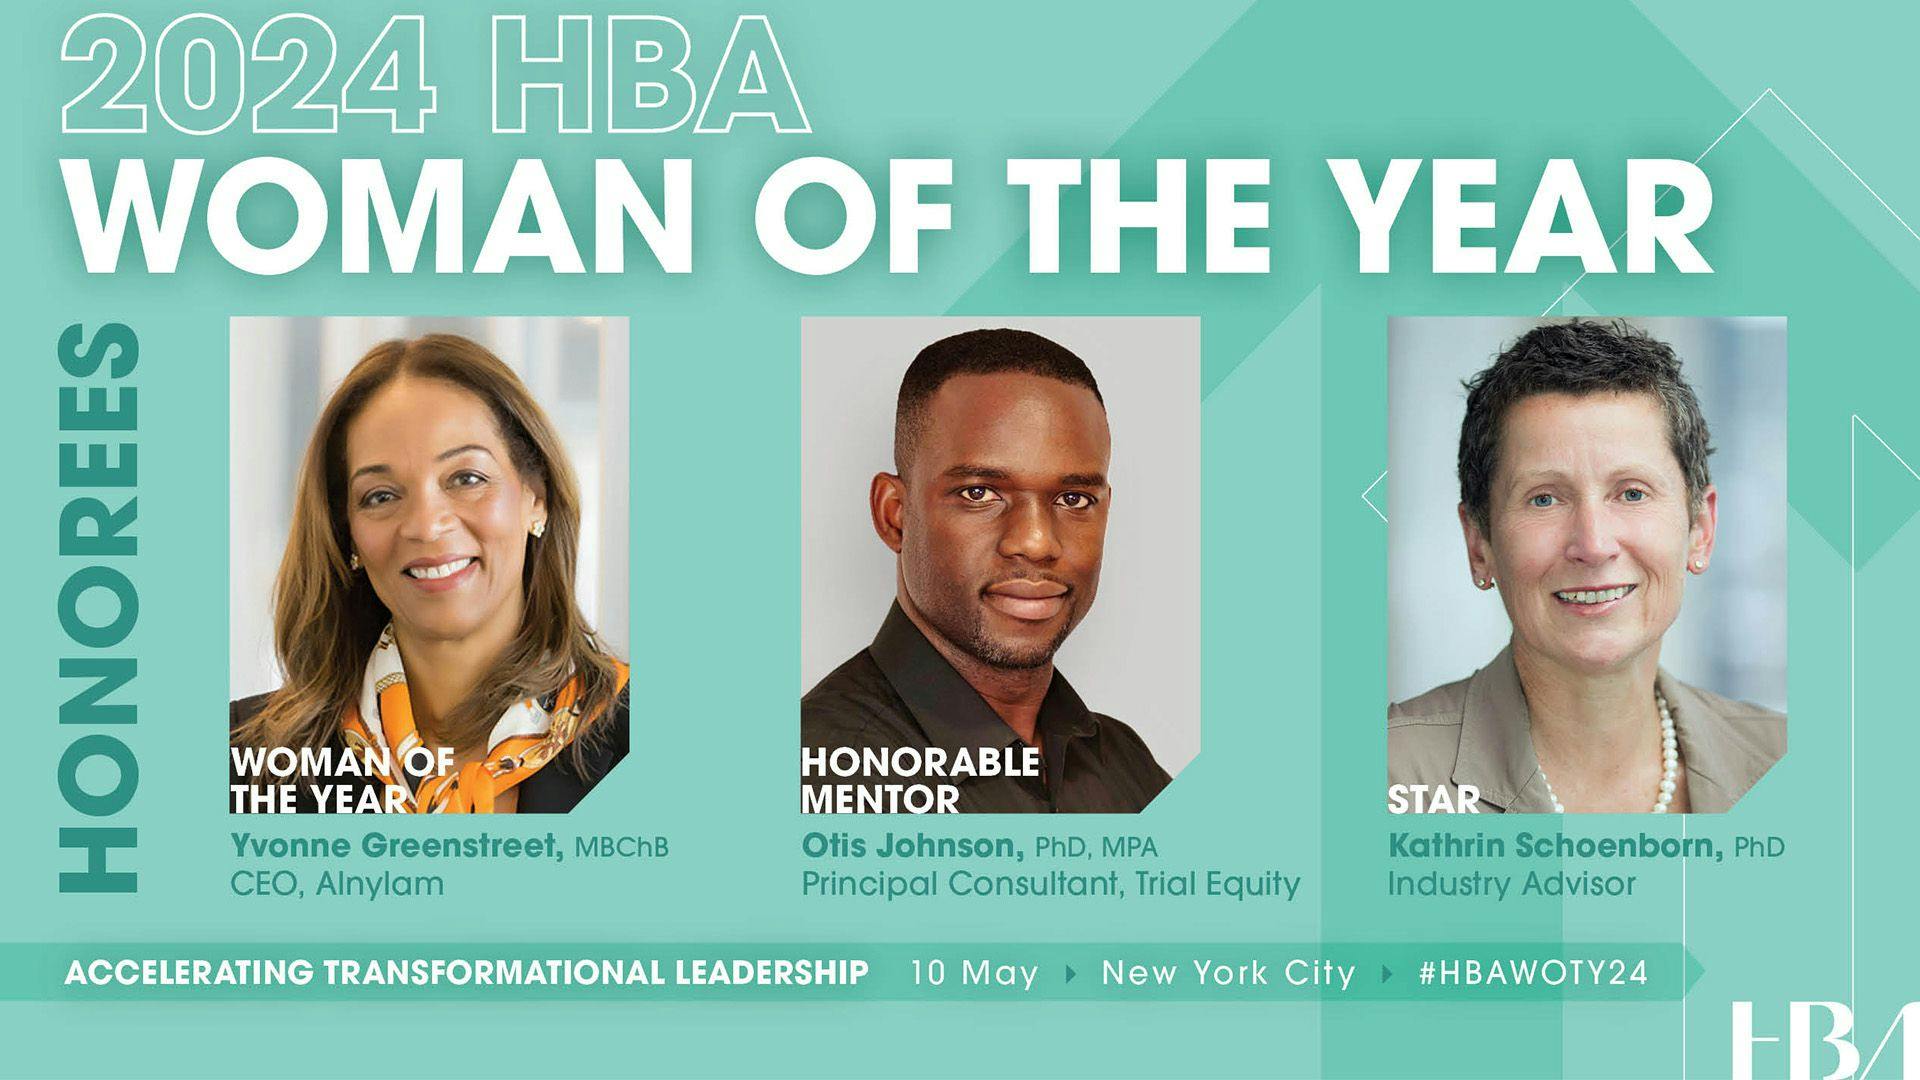 HBA Woman of the Year 2024